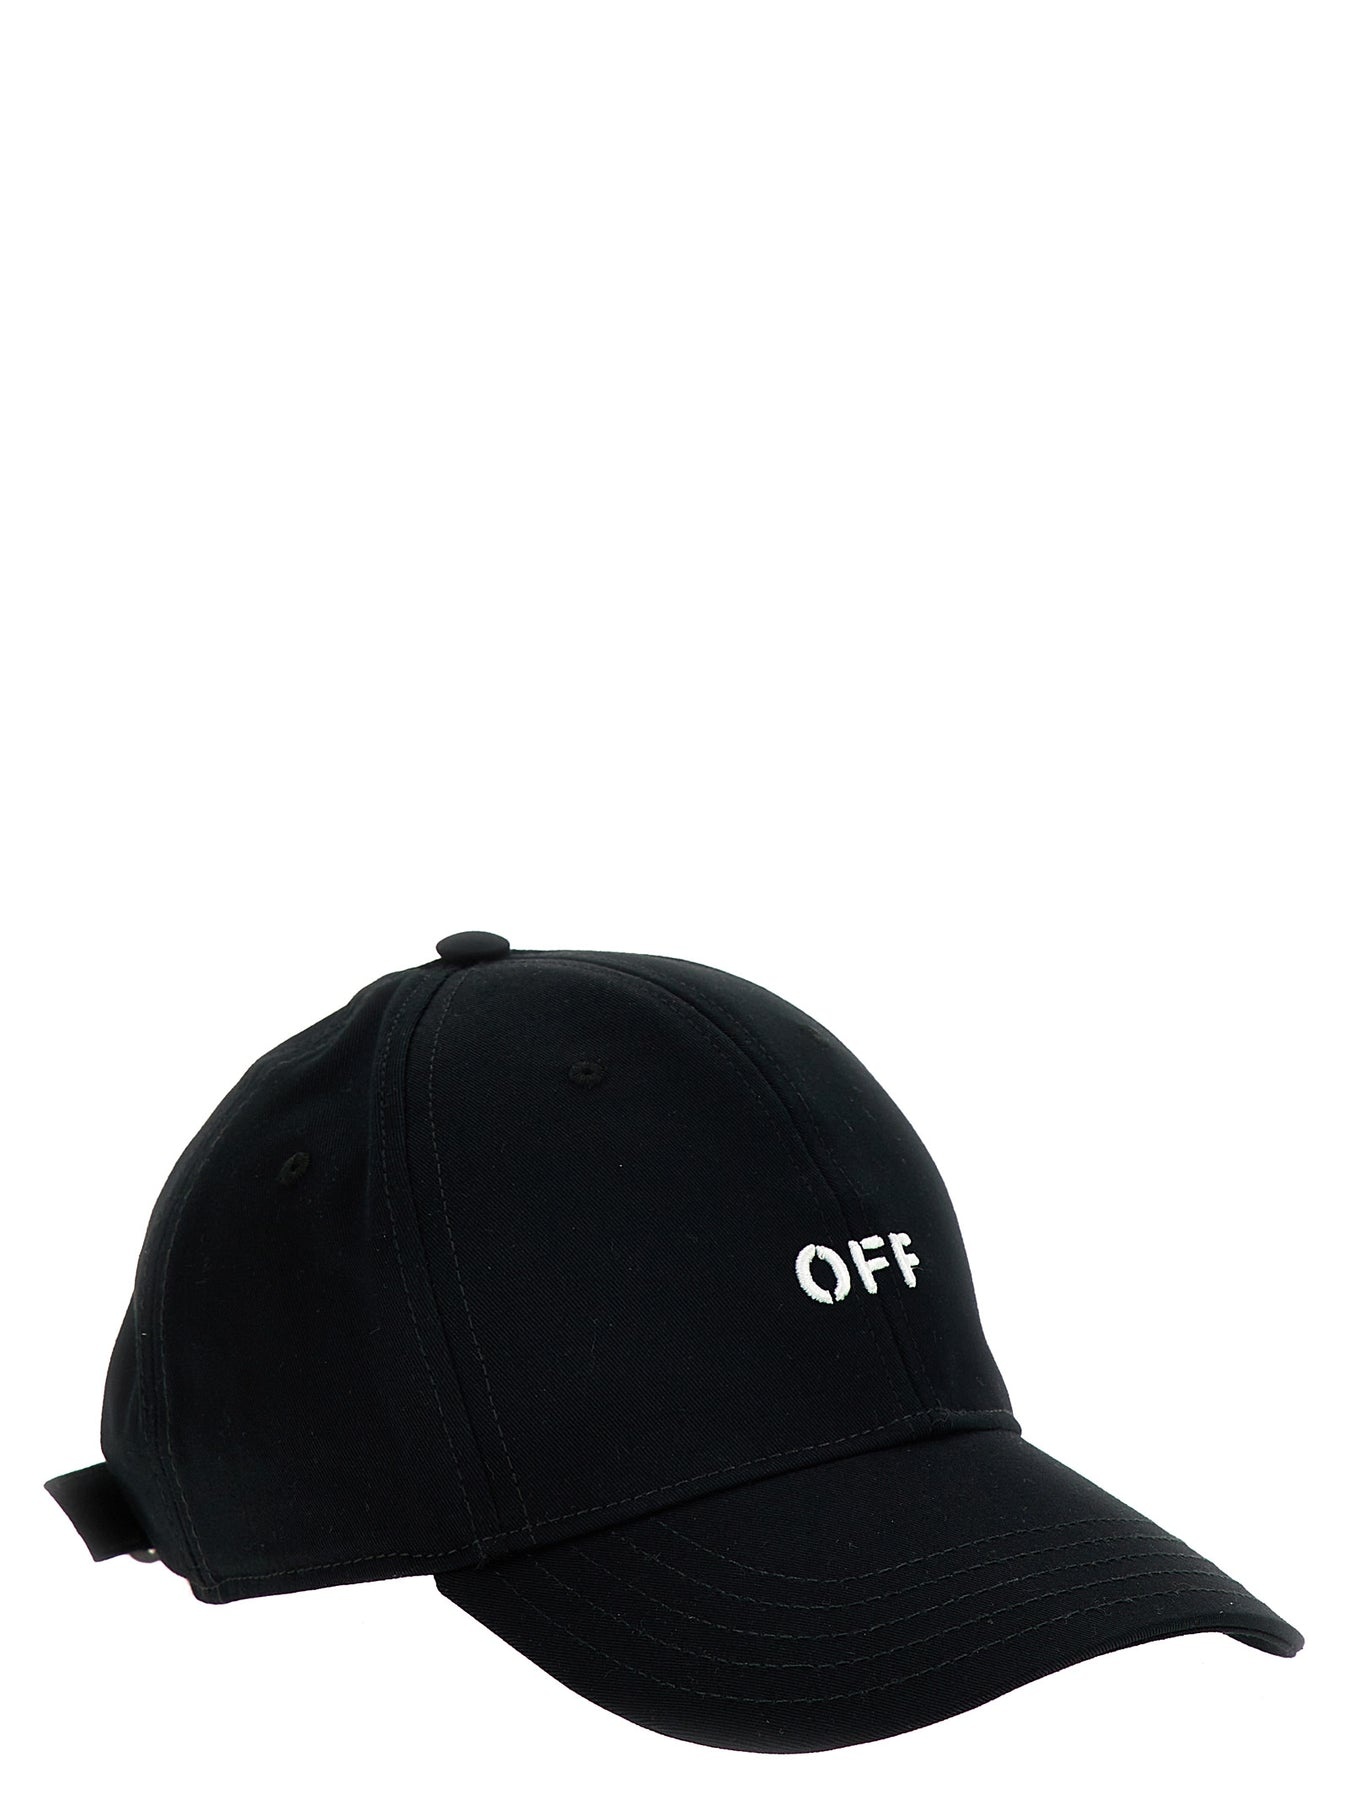 Drill Off Stamp Hats White/Black - 2